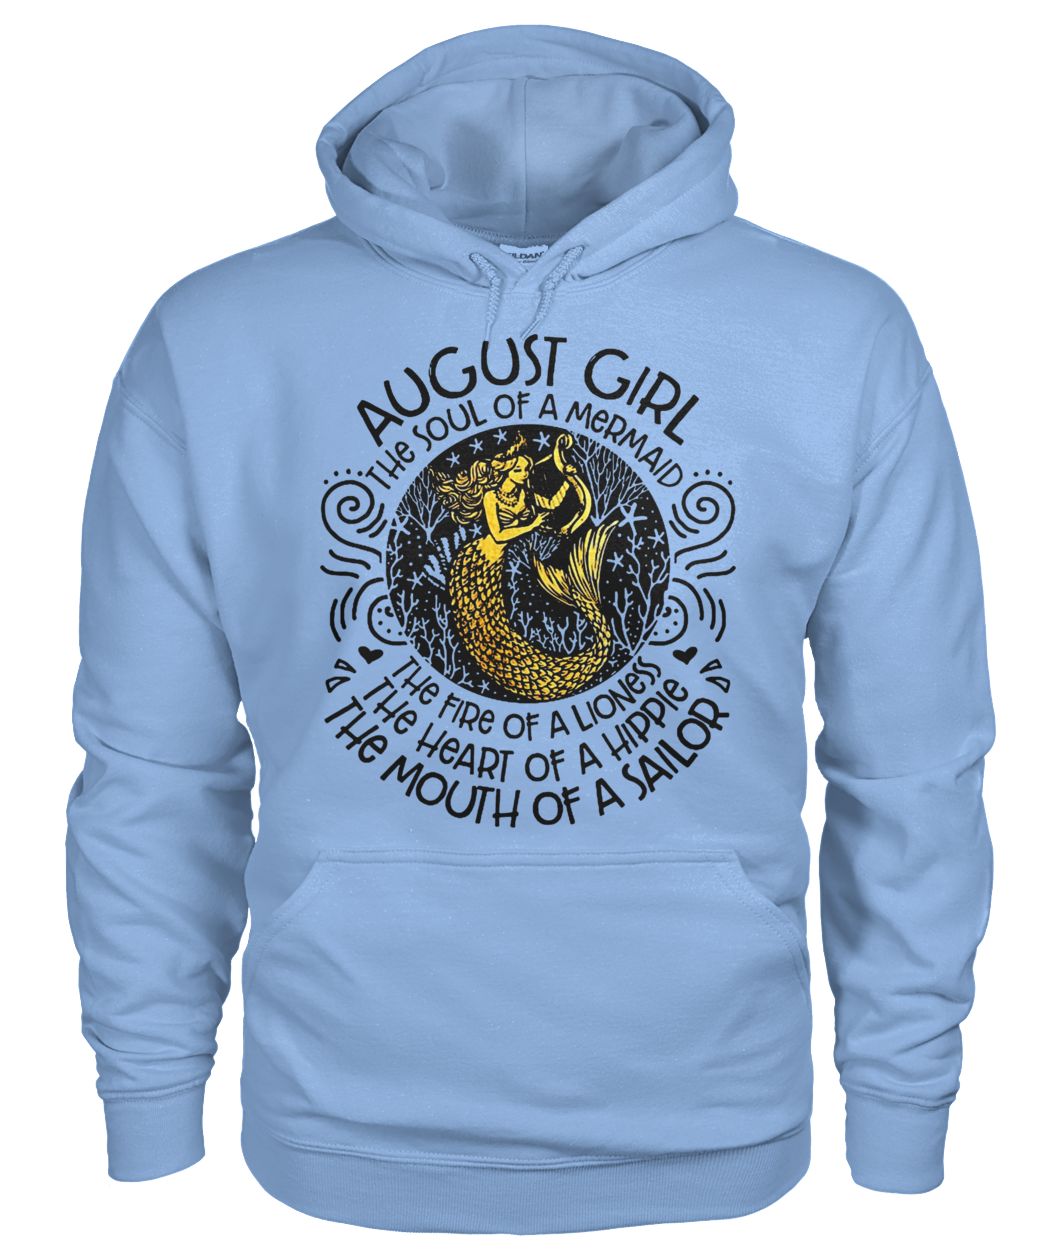 August girl the soul of a mermaid the fire of a lioness the heart of a hippie the mouth of a sailor gildan hoodie